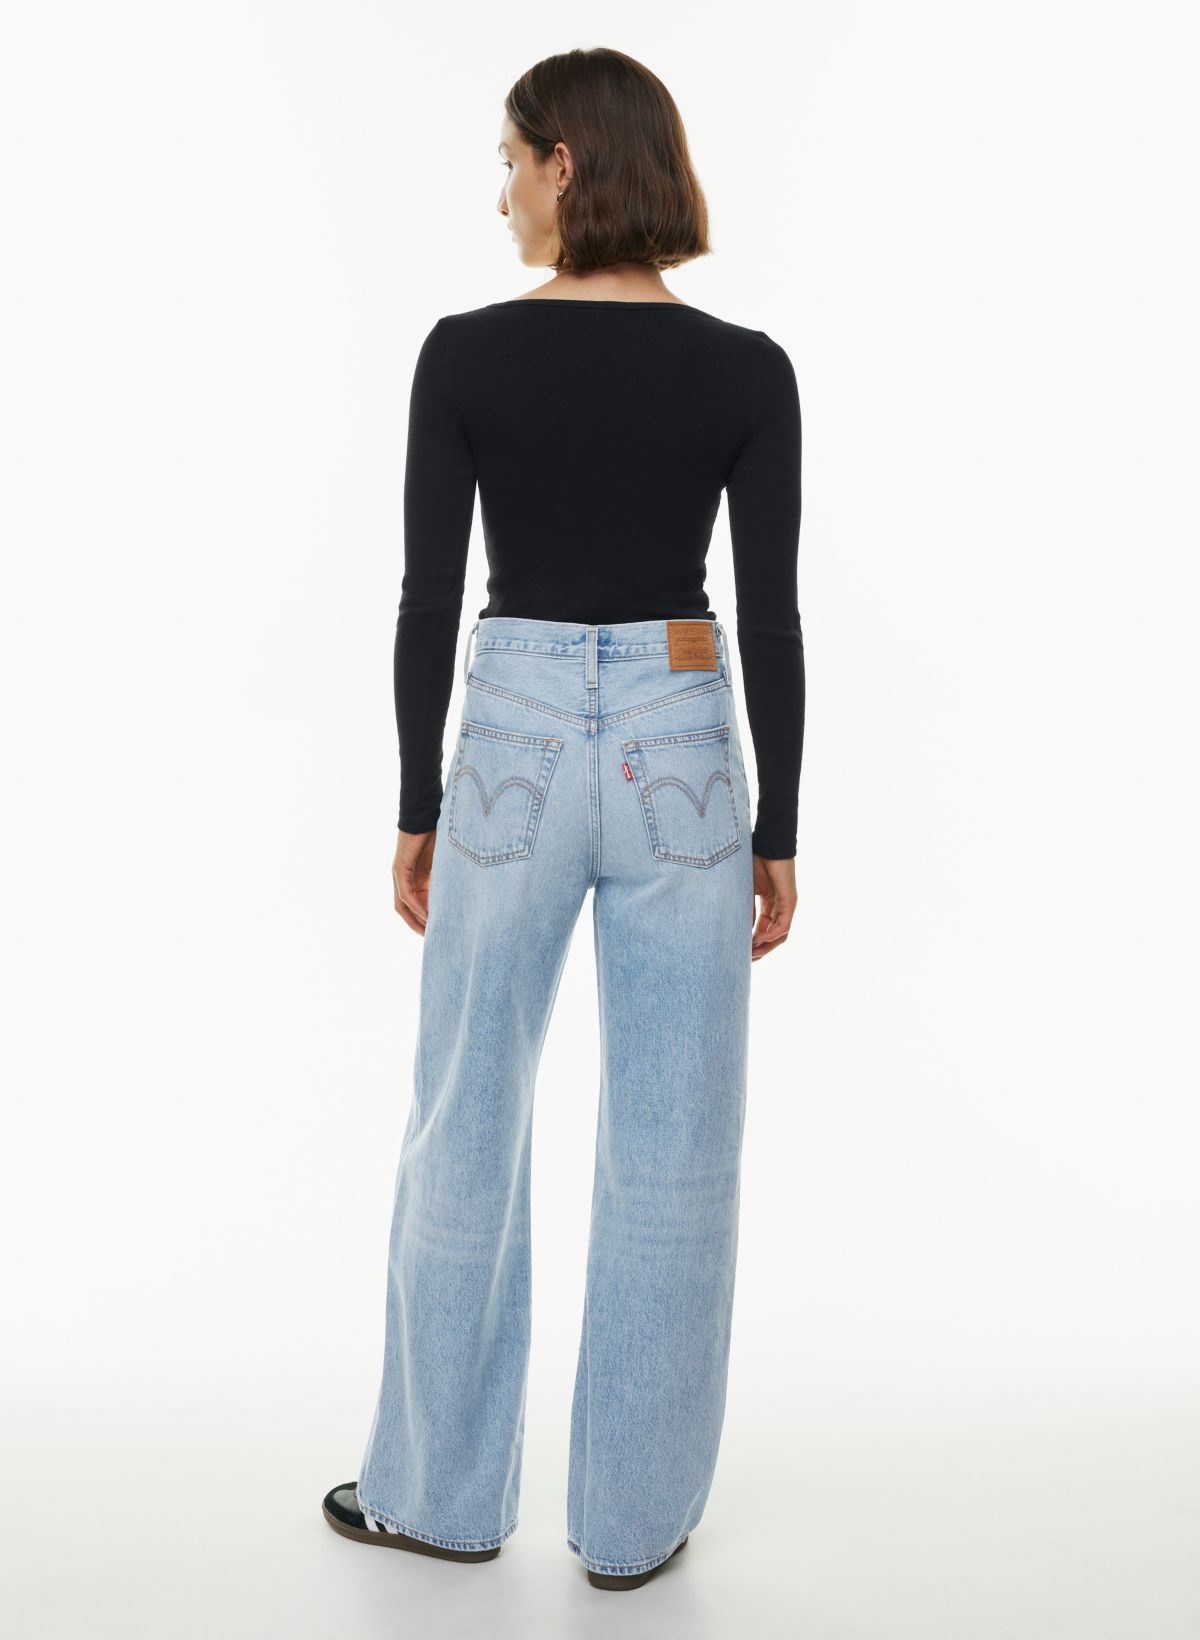 Levi's Ribcage Wide Leg Jeans, 7 Fall Pants Trends More Enticing Than Your  Best Pair of Jeans